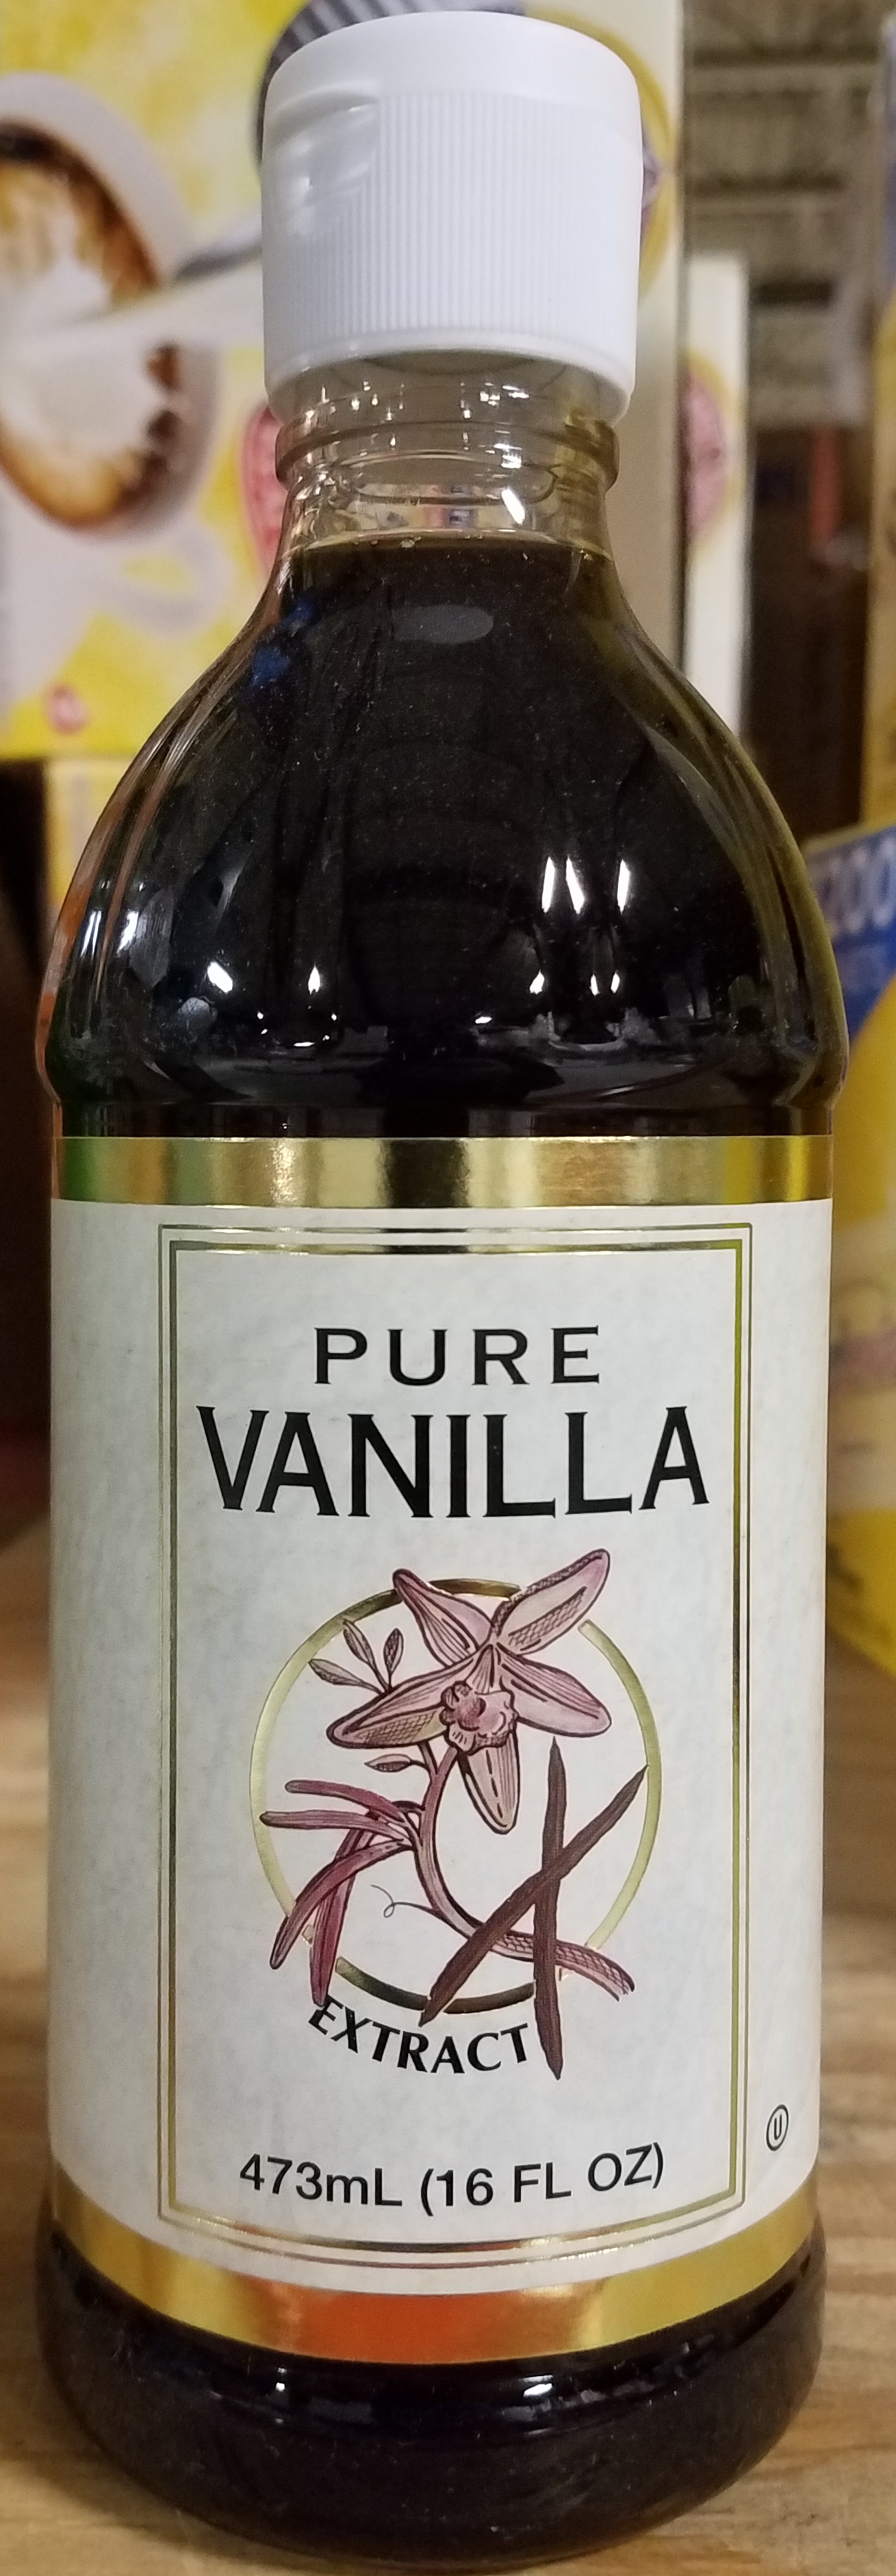 Extract Vanilla Pure 16 FLoz - Sold by PACK